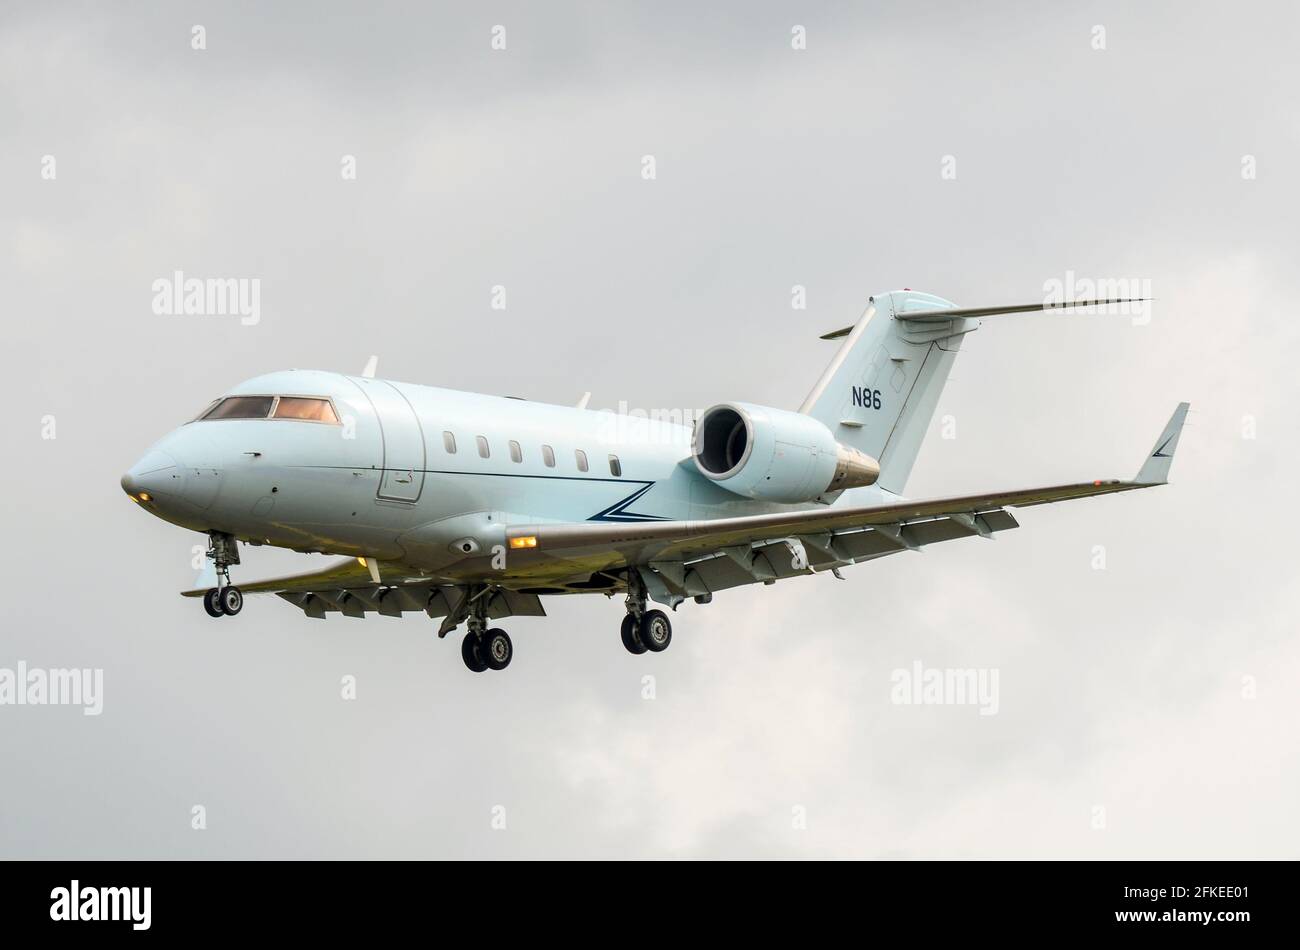 Bombardier Challenger 601 jet plane N86 of the Federal Aviation Administration landing at the Royal International Air Tattoo, RIAT, RAF Fairford, UK Stock Photo